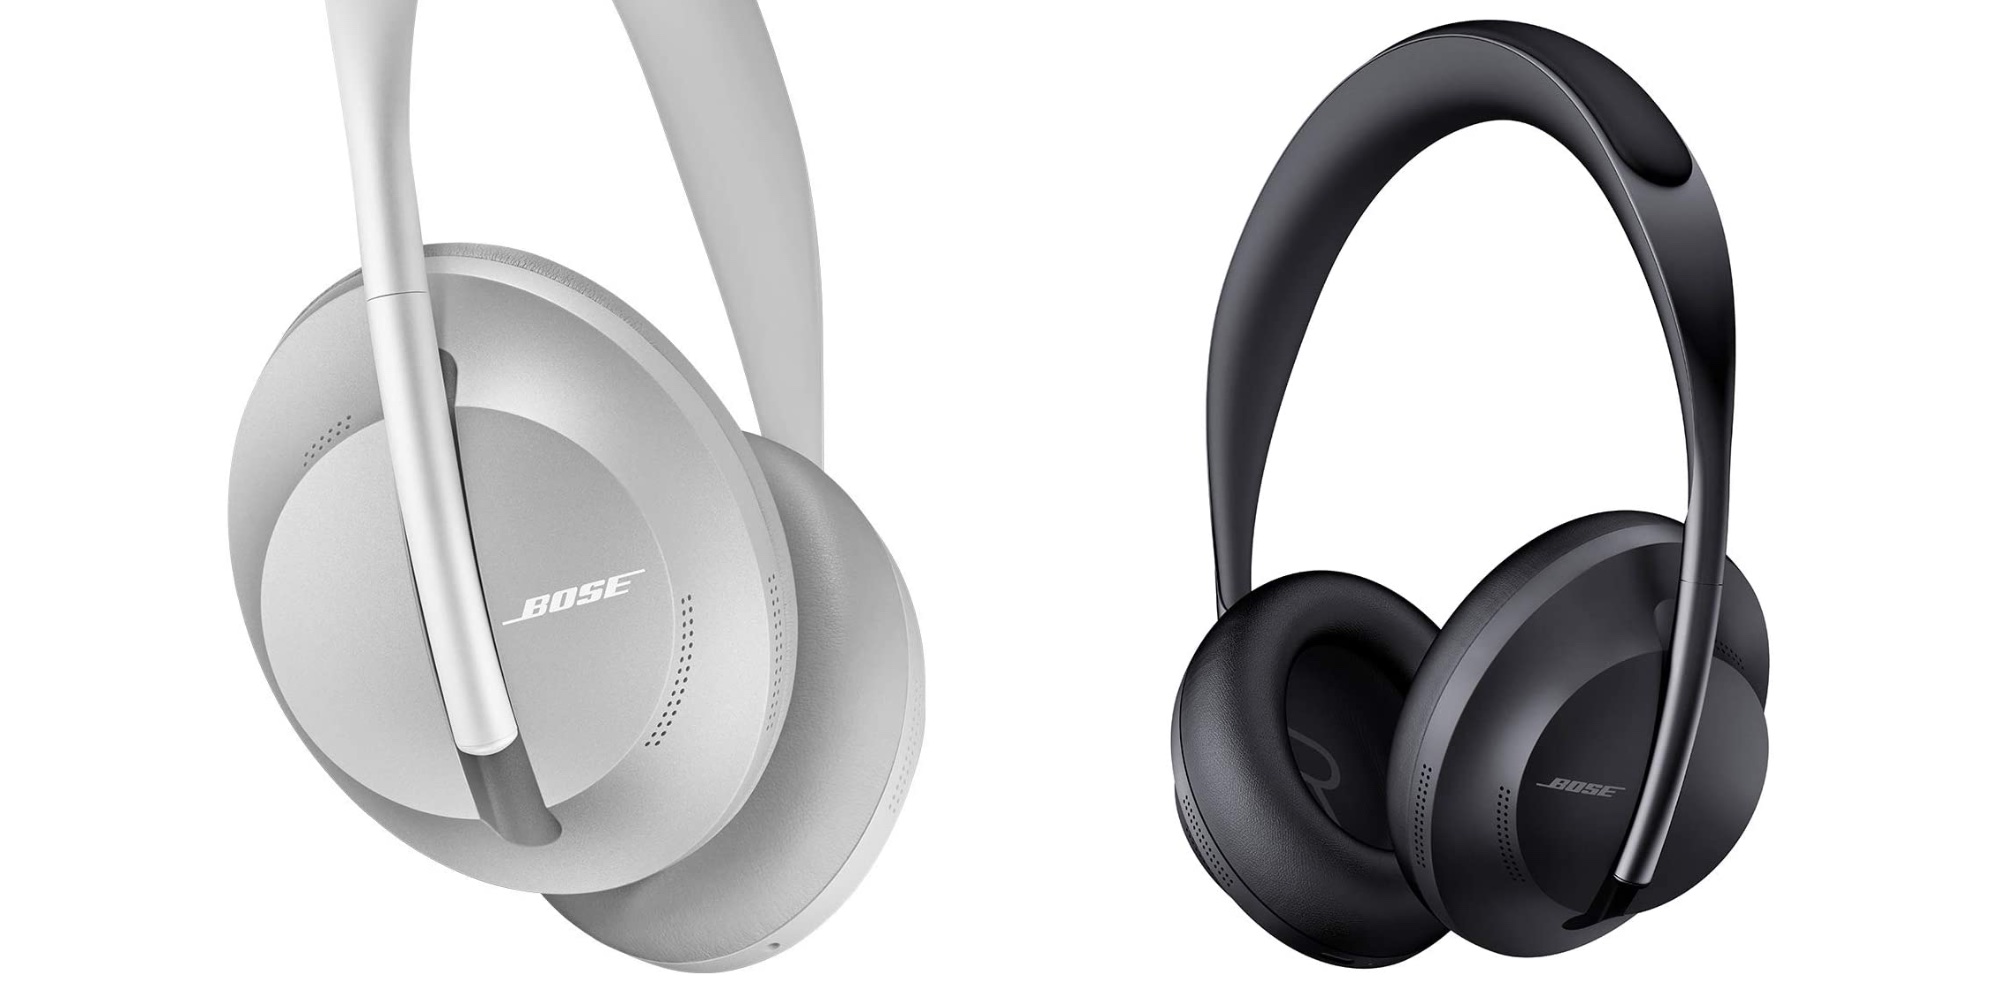 Enjoy best-in-class ANC with Bose Headphones 700 from $259 